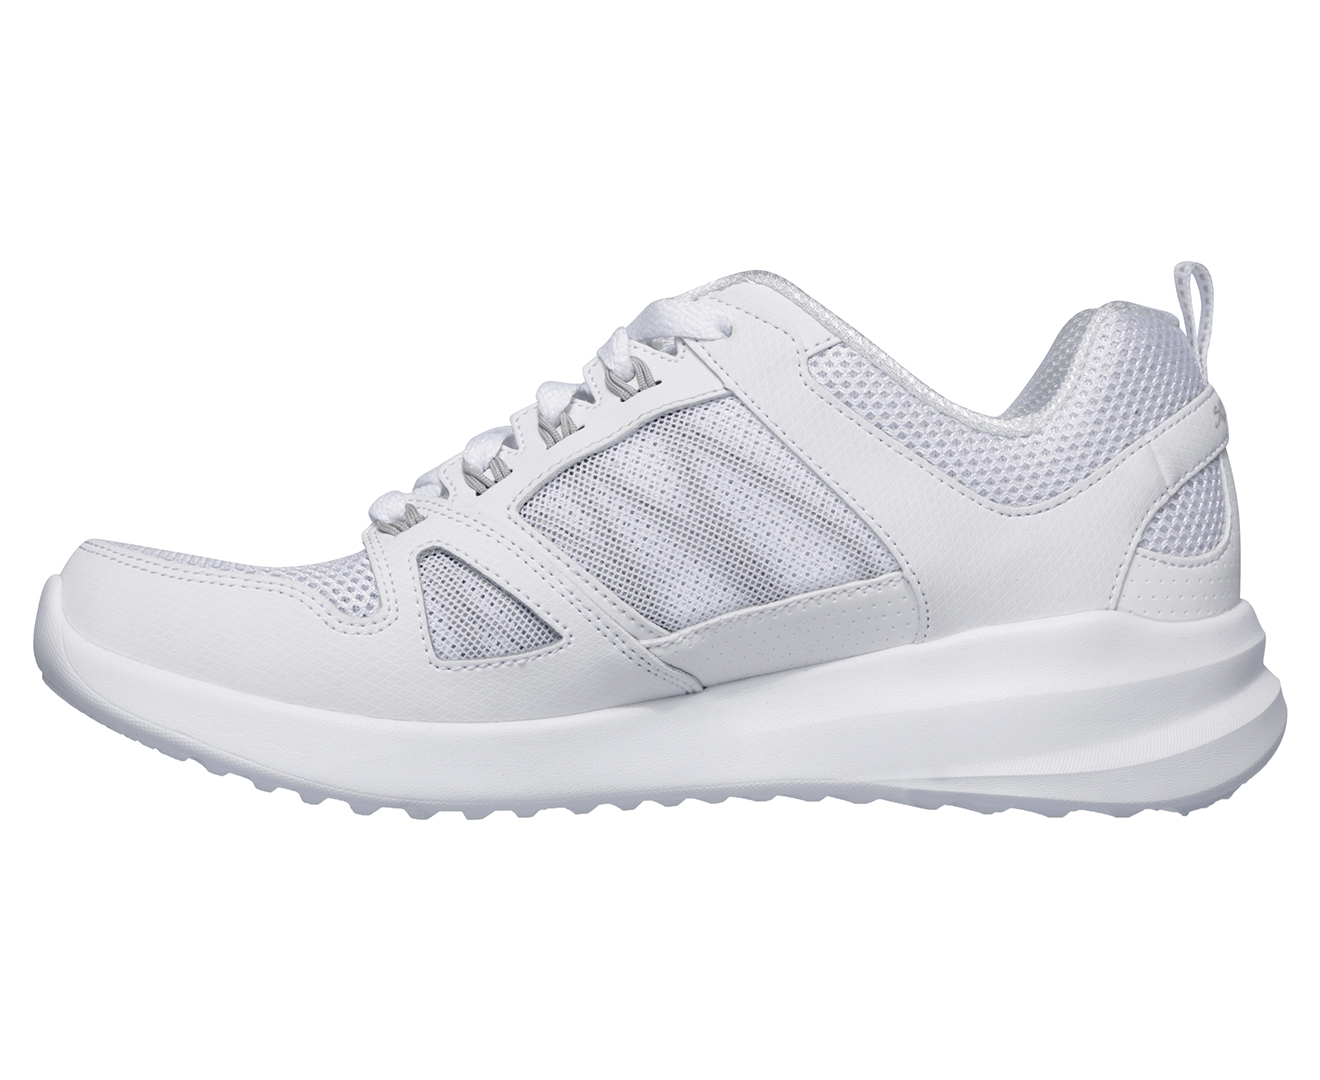 Skechers Women's Skybound Sports Training Shoes - White | Catch.co.nz